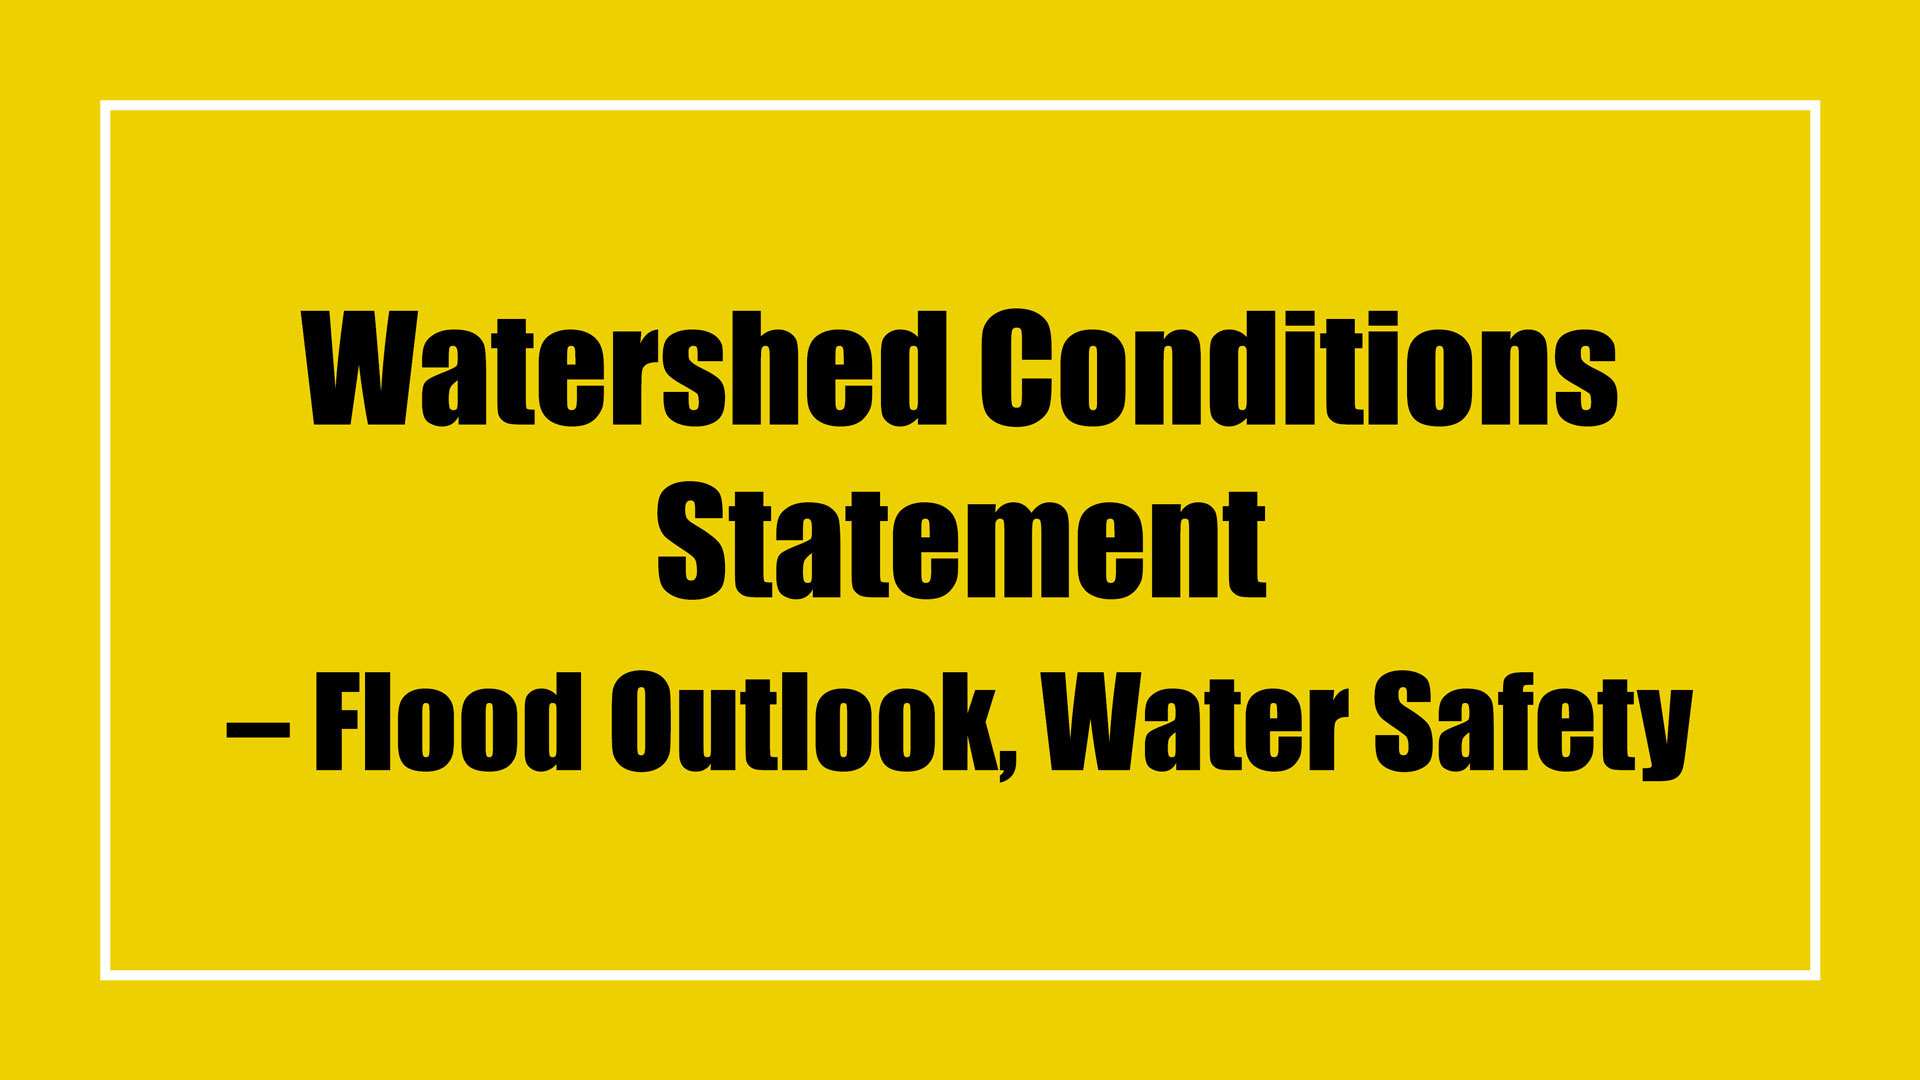 Flood Outlook/Water Safety Statement 